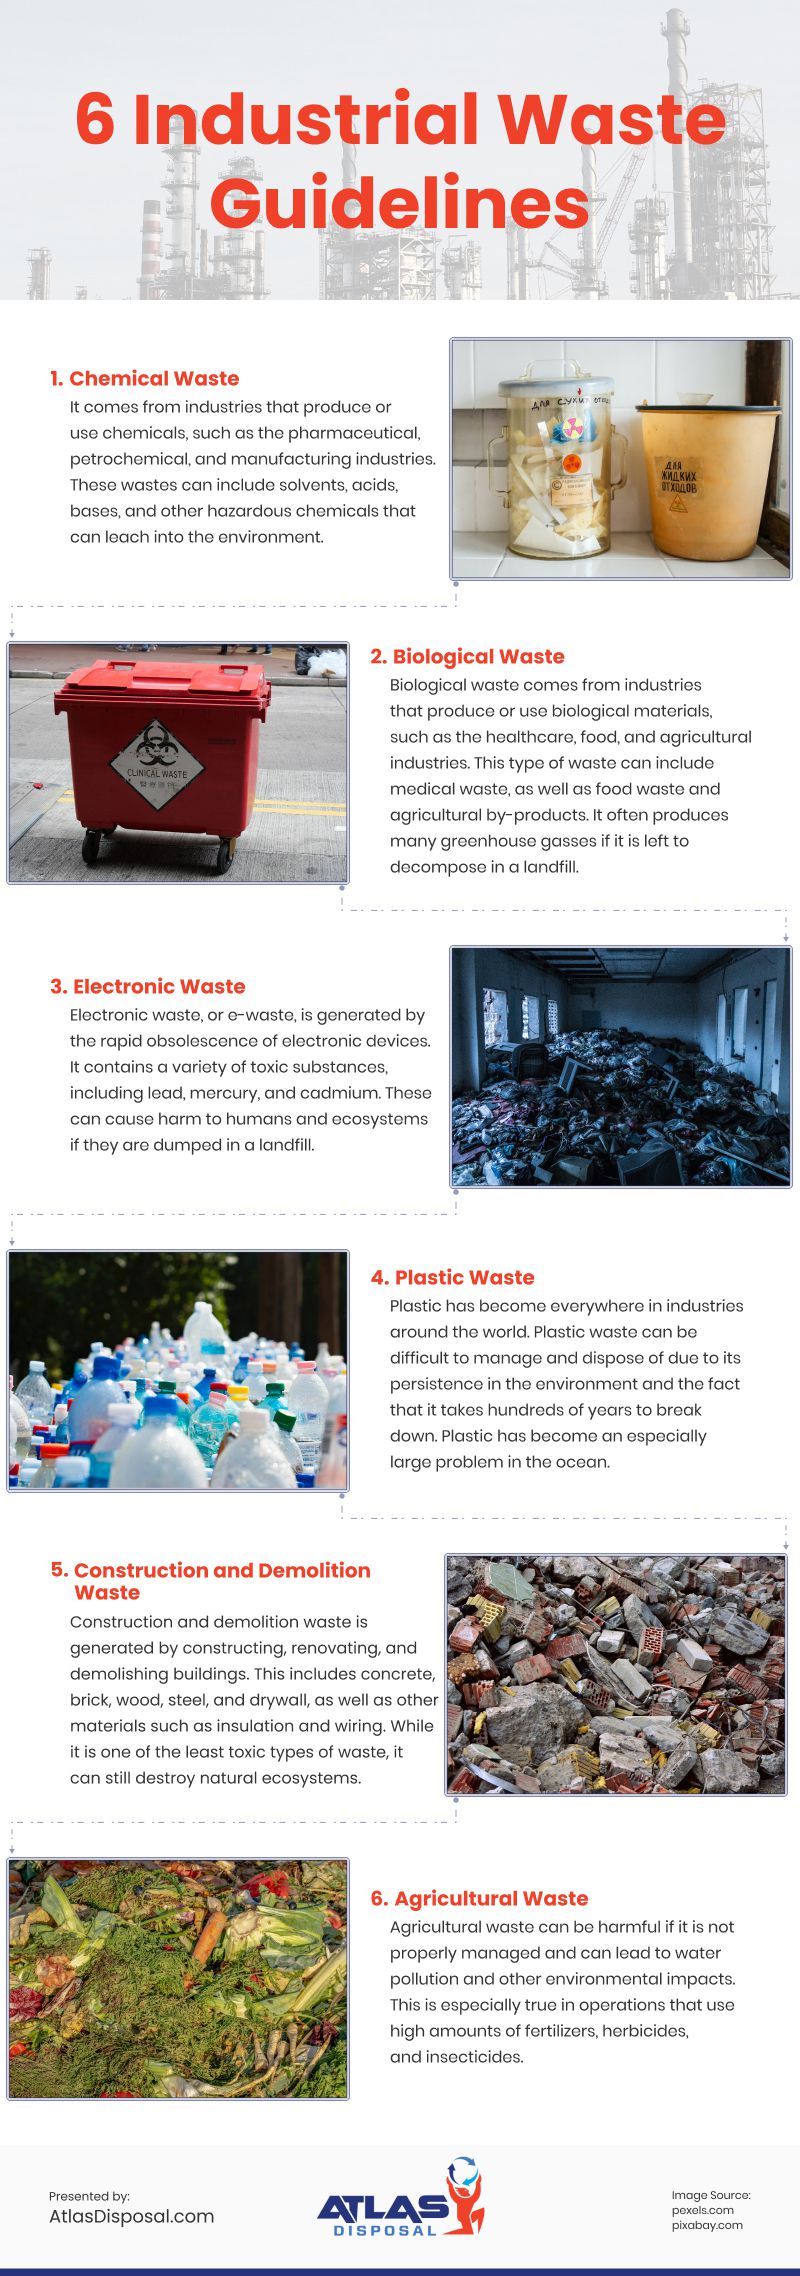 6 Industrial Waste Guidelines Infographic